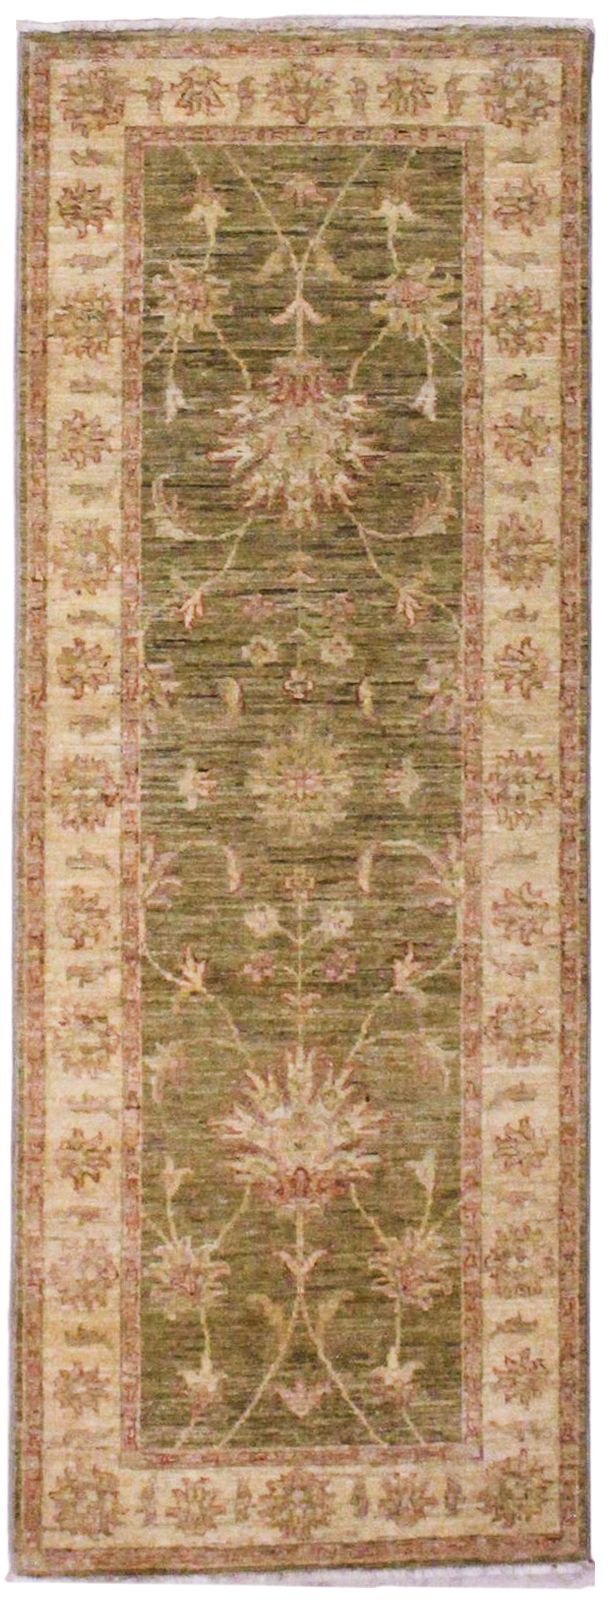 2x6 Green and Gold Turkish Oushak Rug